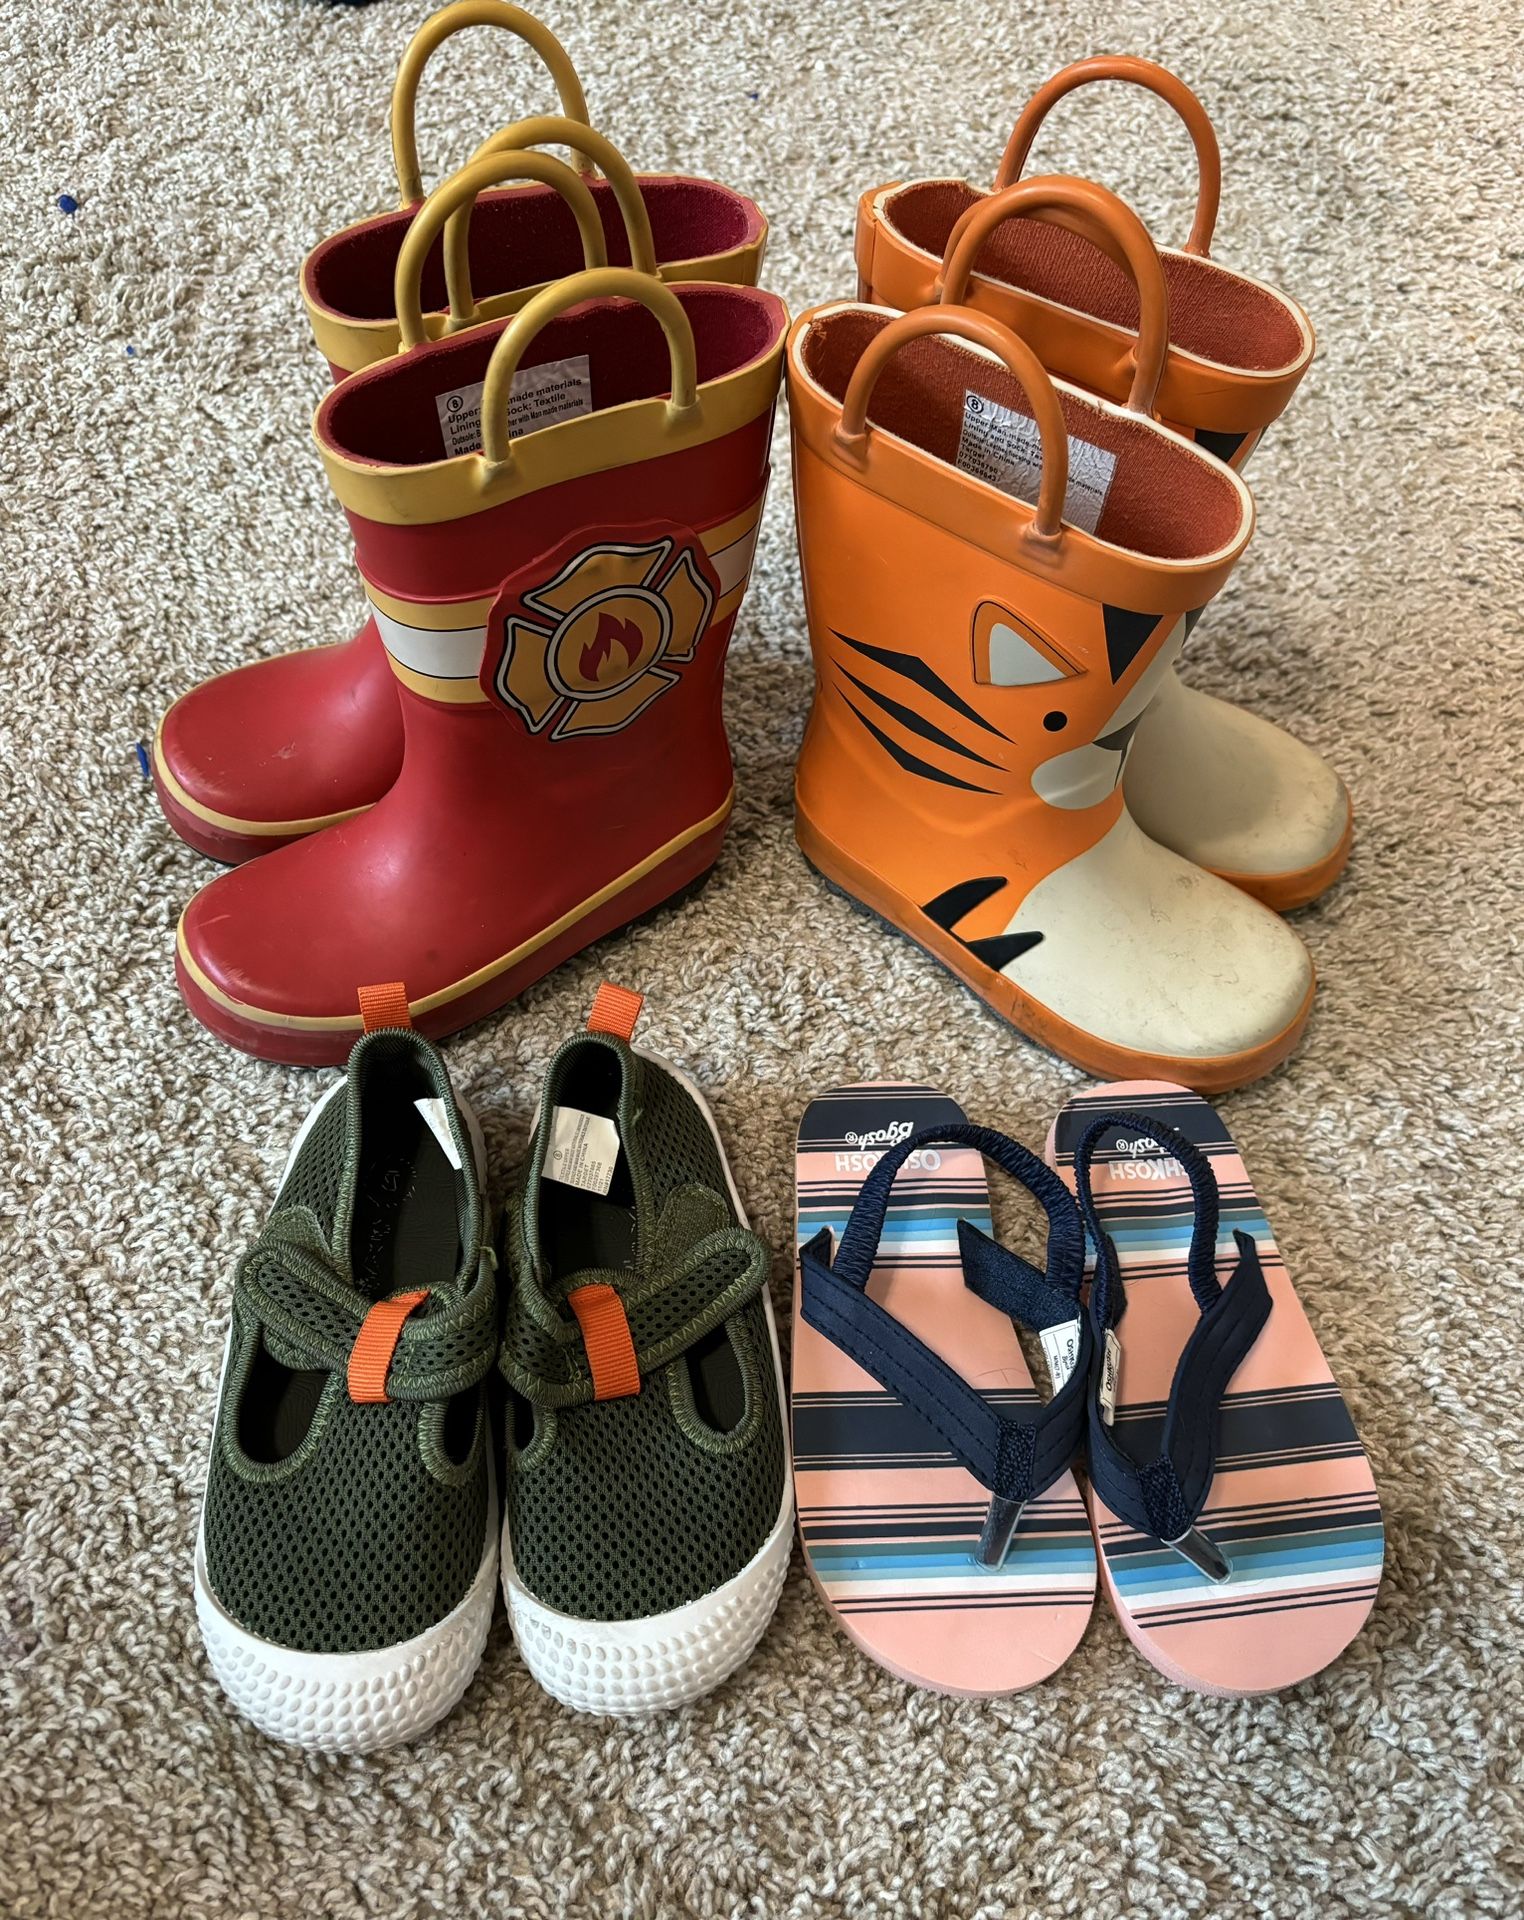 Size 8 Toddler Boy Shoes 